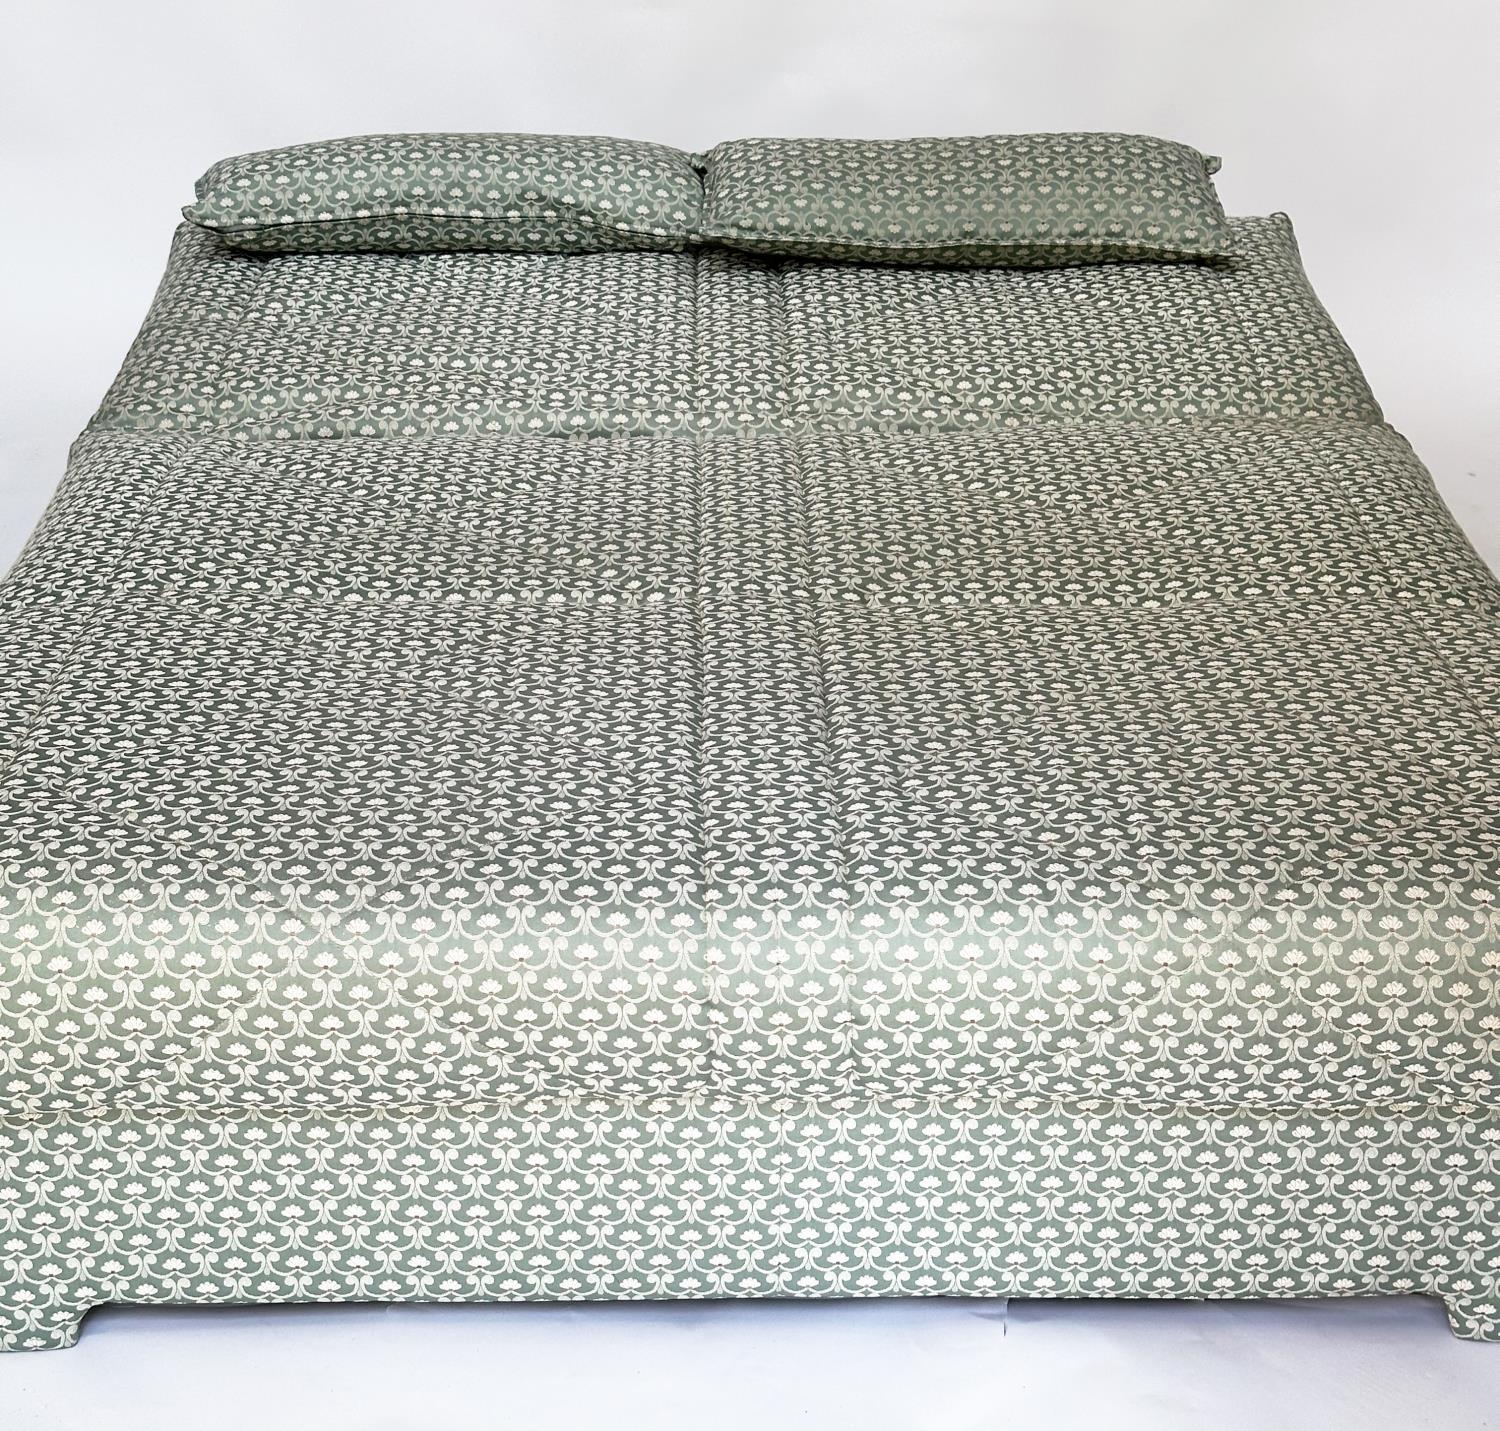 SOFA BED, geometric print upholstered with cushion, transferring to bed, 142cm W (180cm extended). - Image 5 of 8